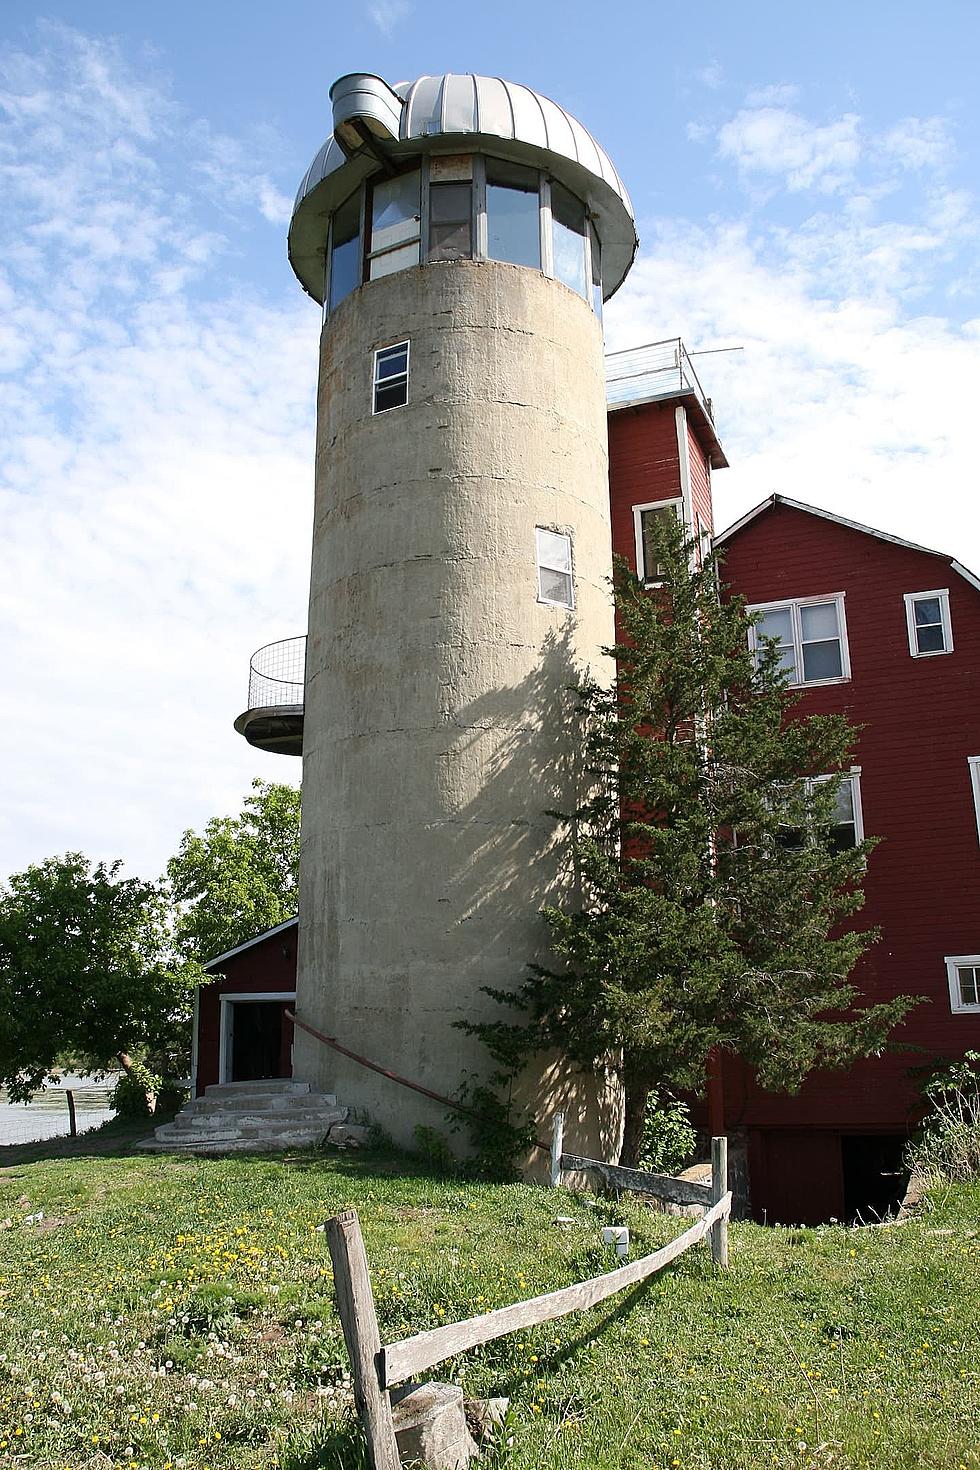 Have You Ever Stayed In a Minnesota Silo? If Not, Here’s Your Chance